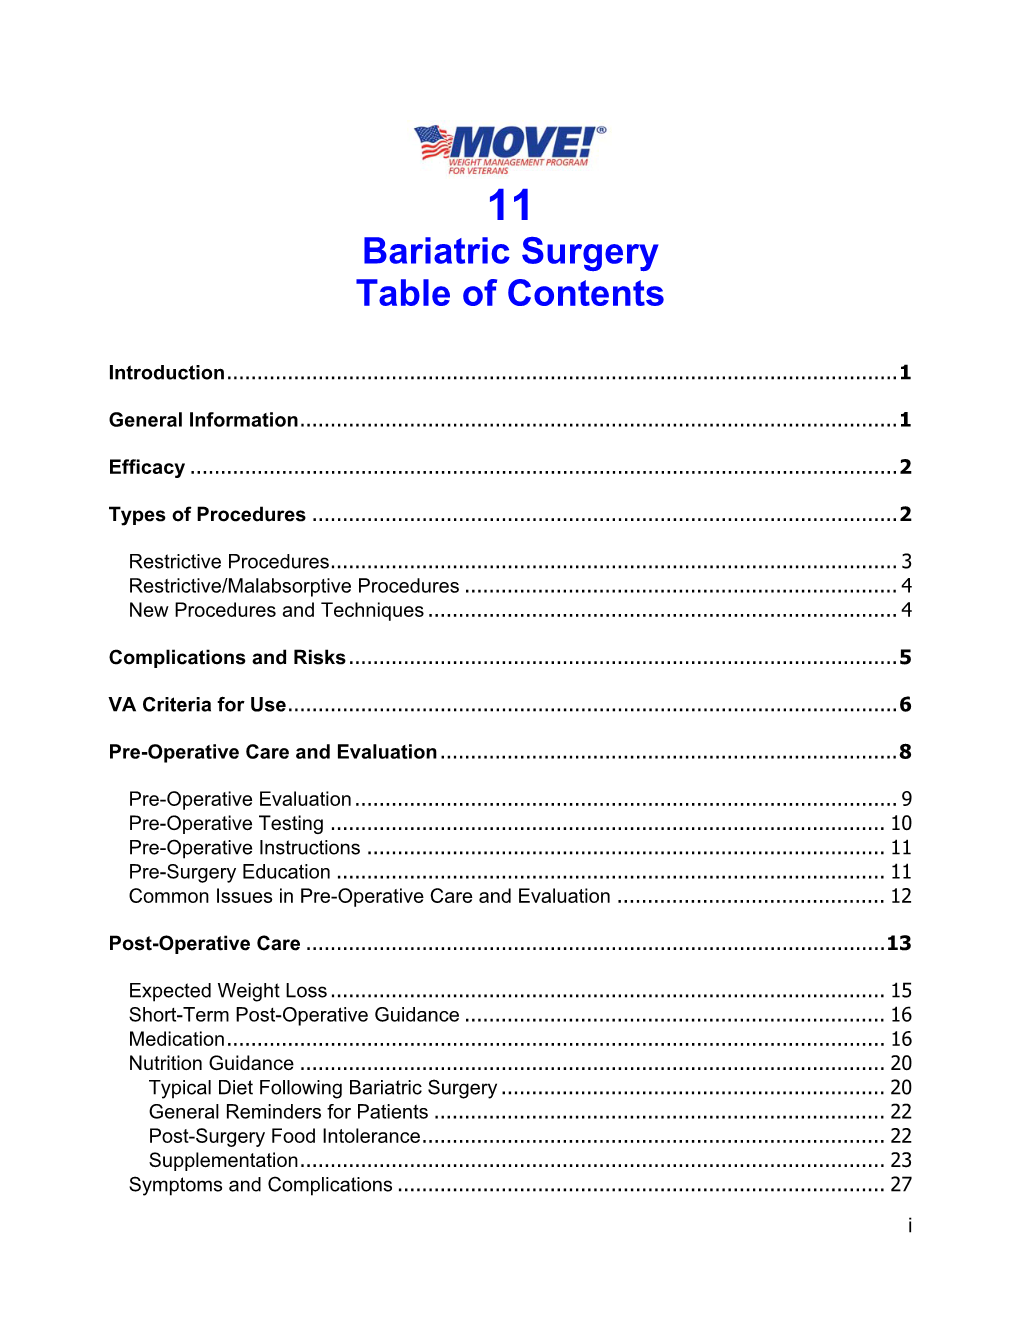 MOVE! Reference Manual Bariatric Surgery Chapter 11